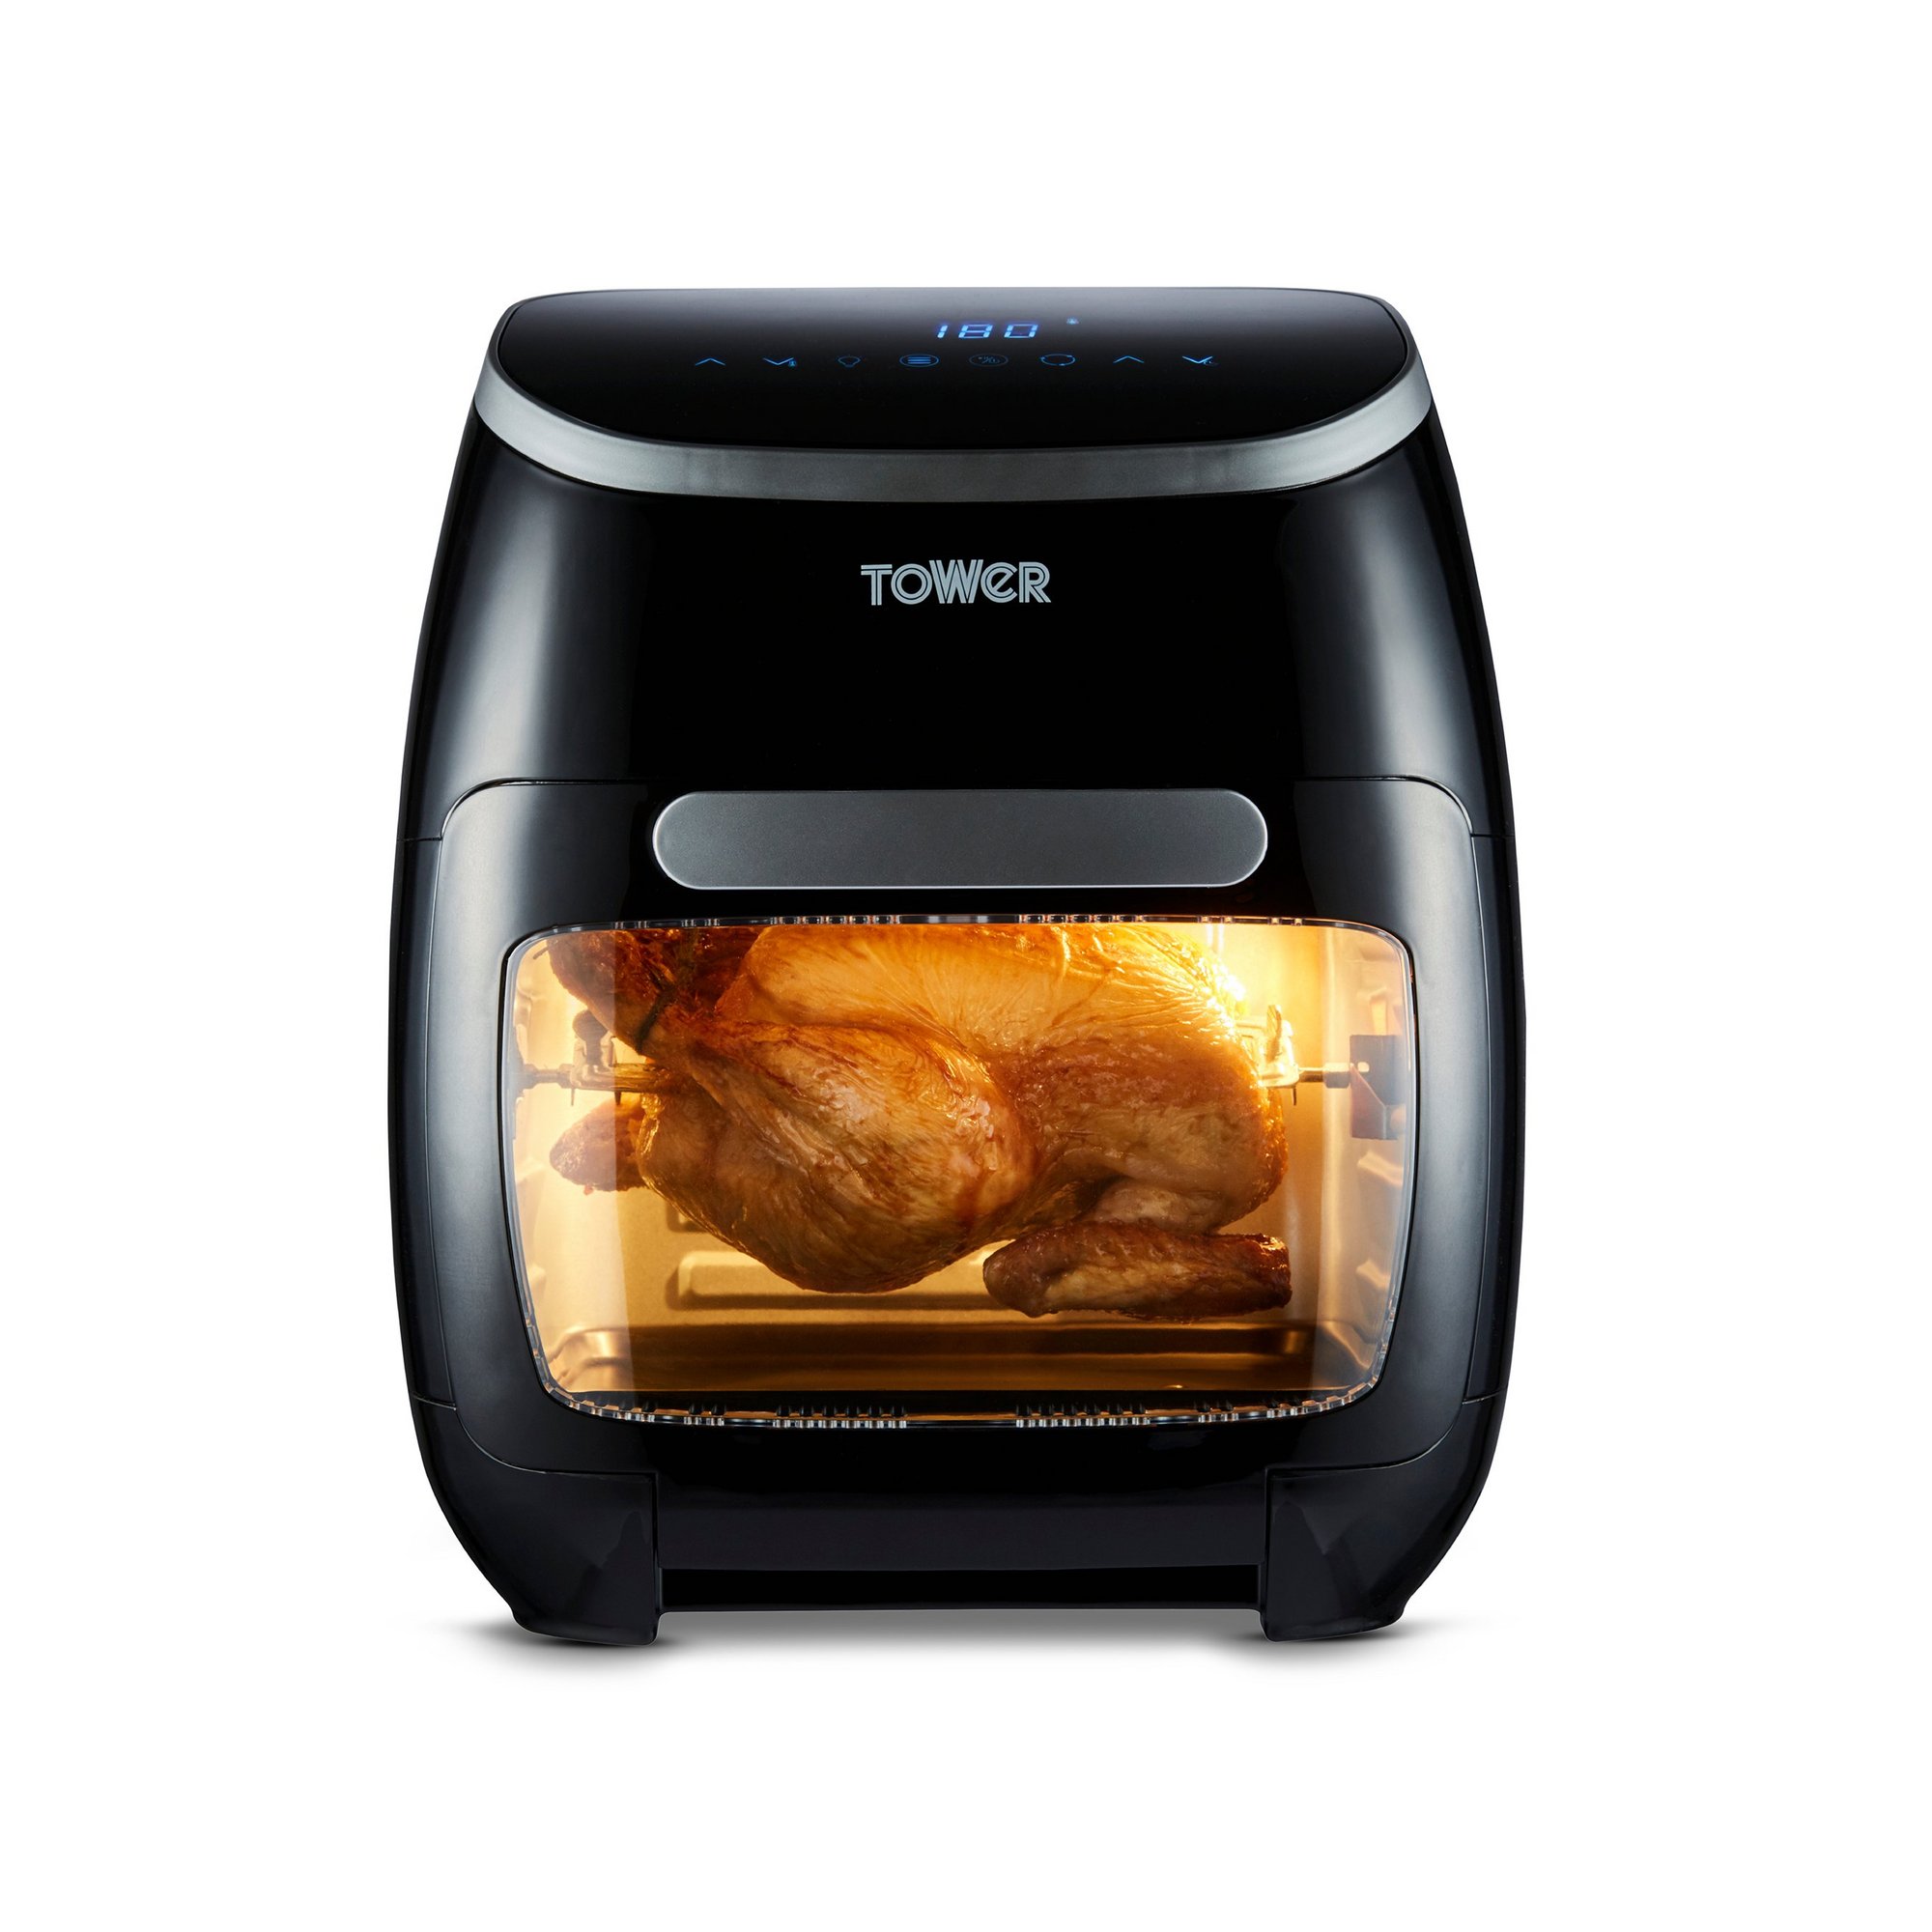 Tower Vortx Xpress Pro Combo 10-in-1 11 Litre Digital Air Fryer Oven